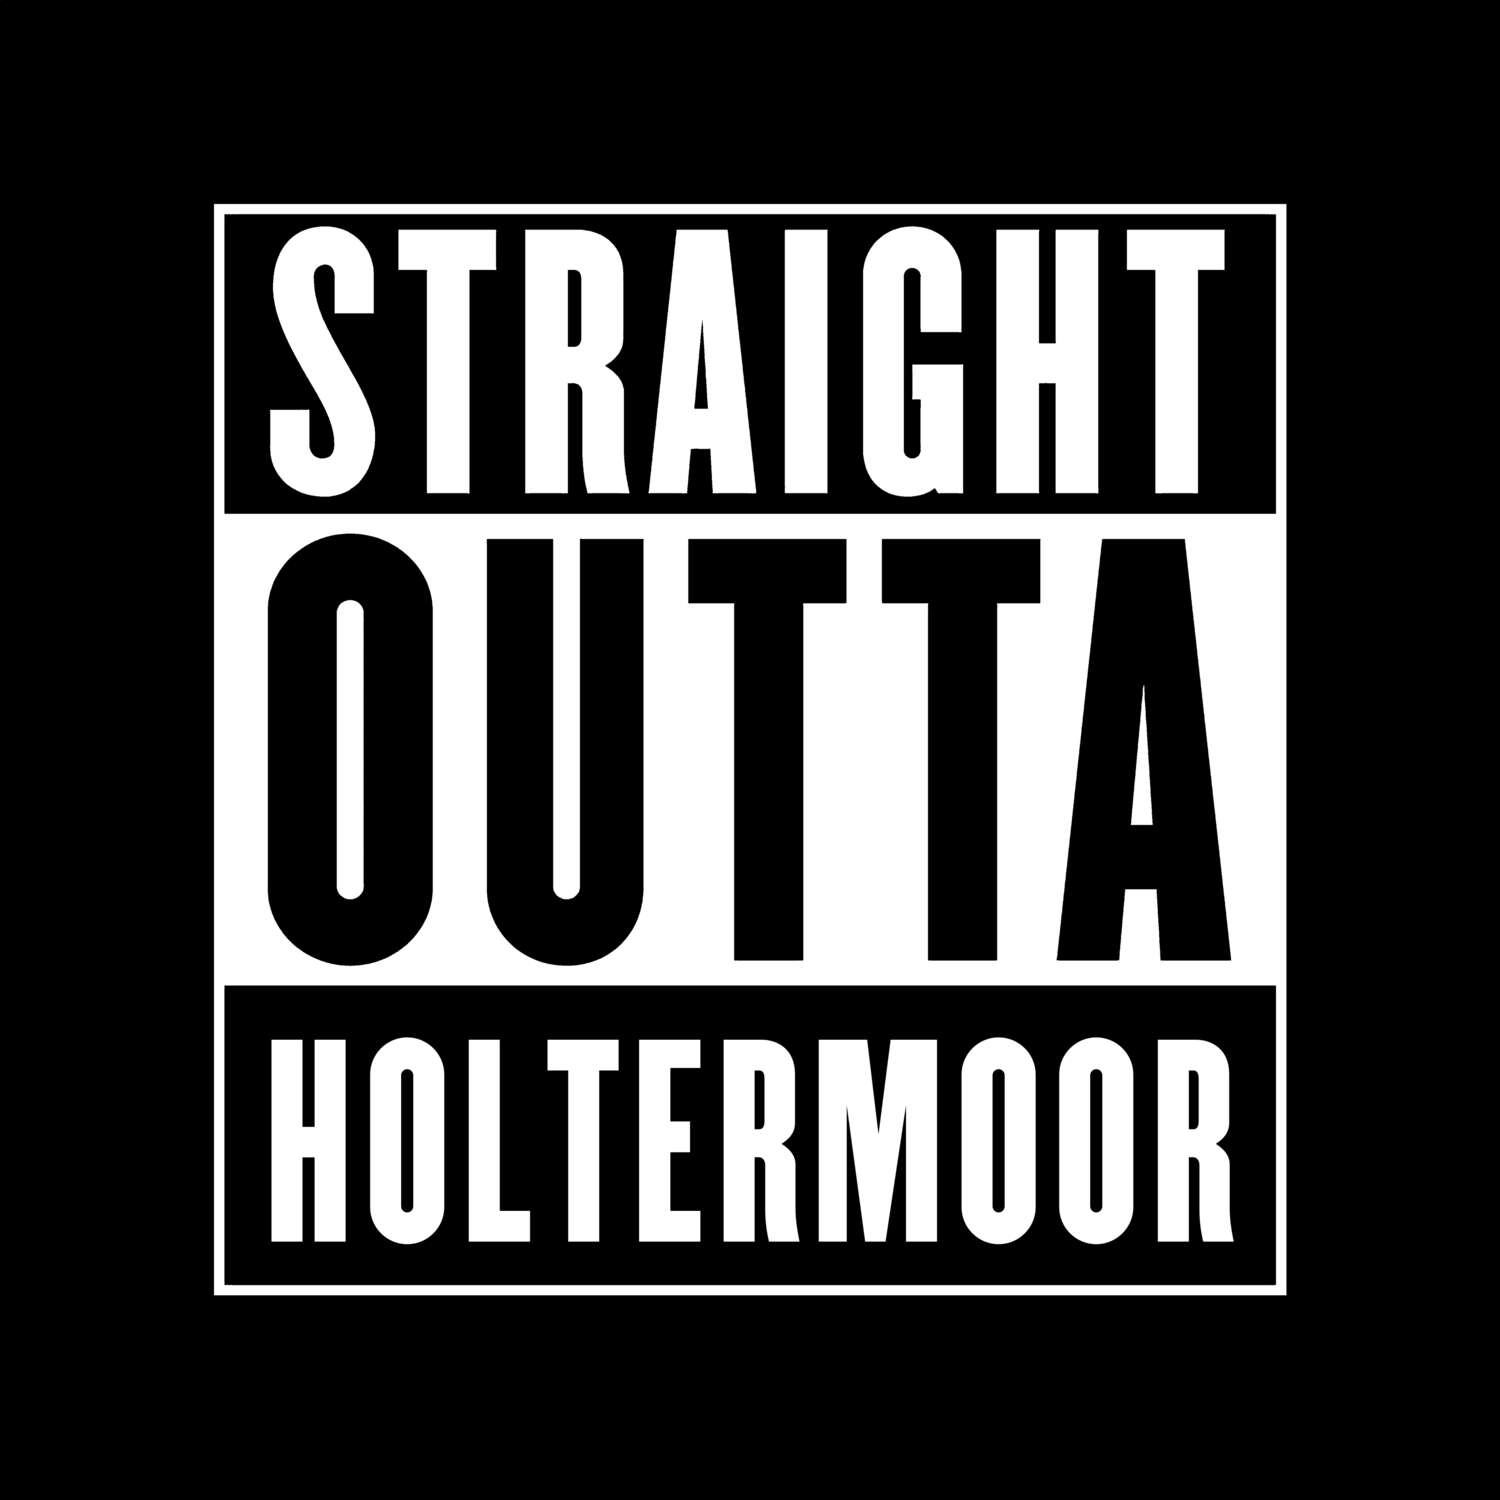 Holtermoor T-Shirt »Straight Outta«